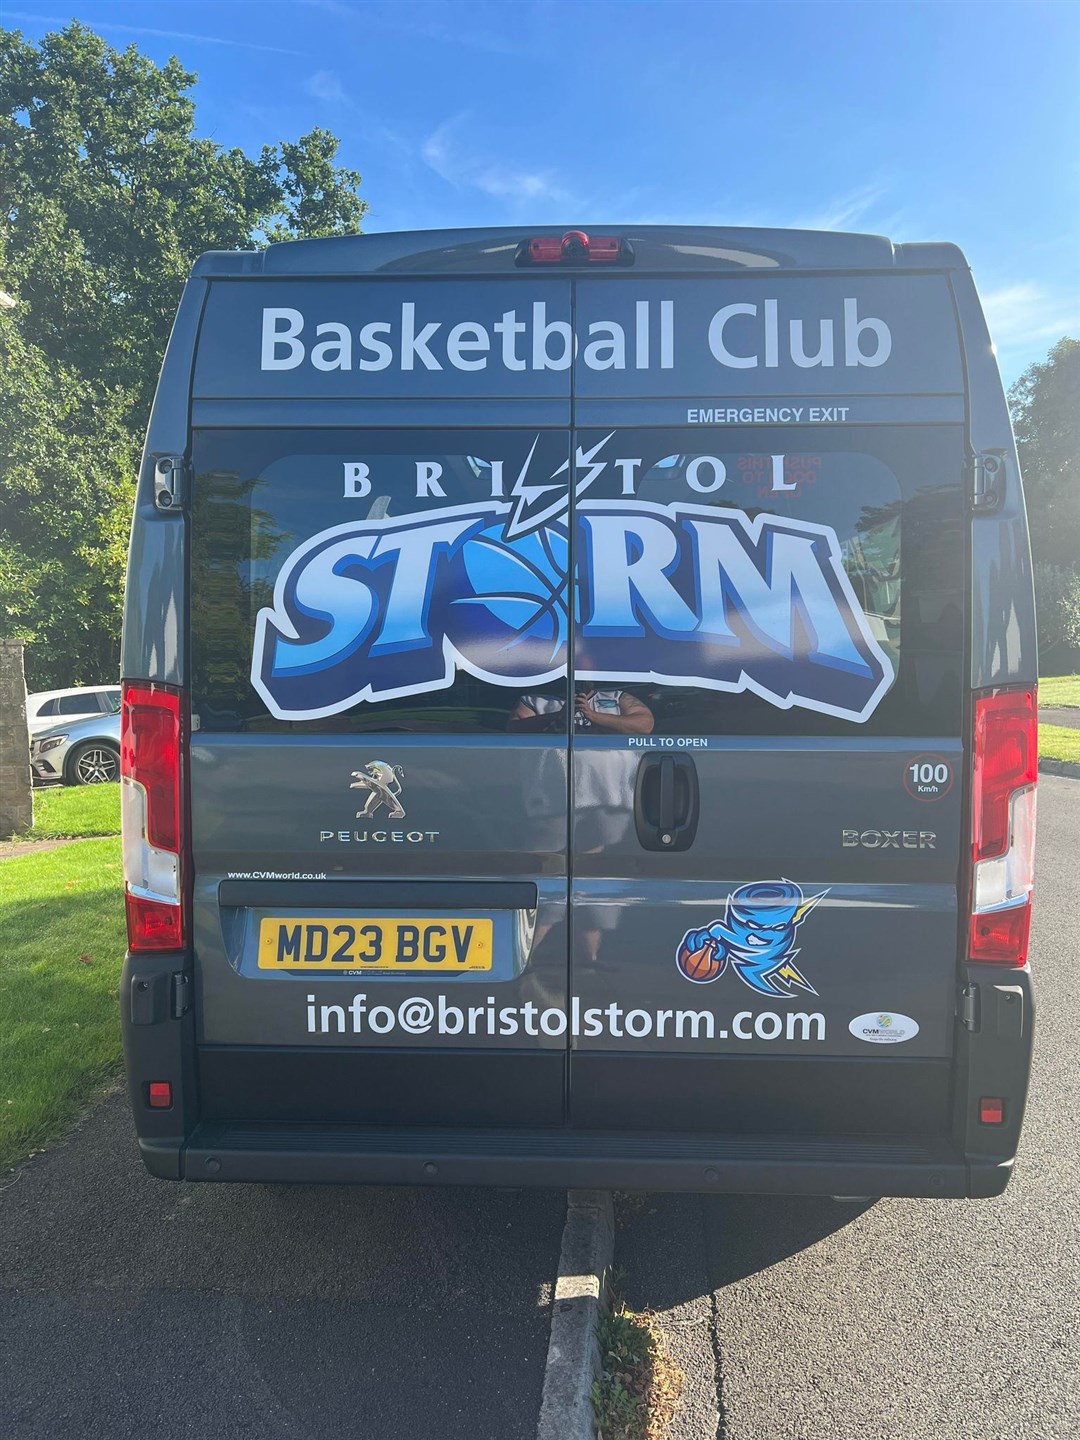 The new minibus purchased by Maya Jama is donned with the Bristol Storm branding and logo (David Senart/PA)